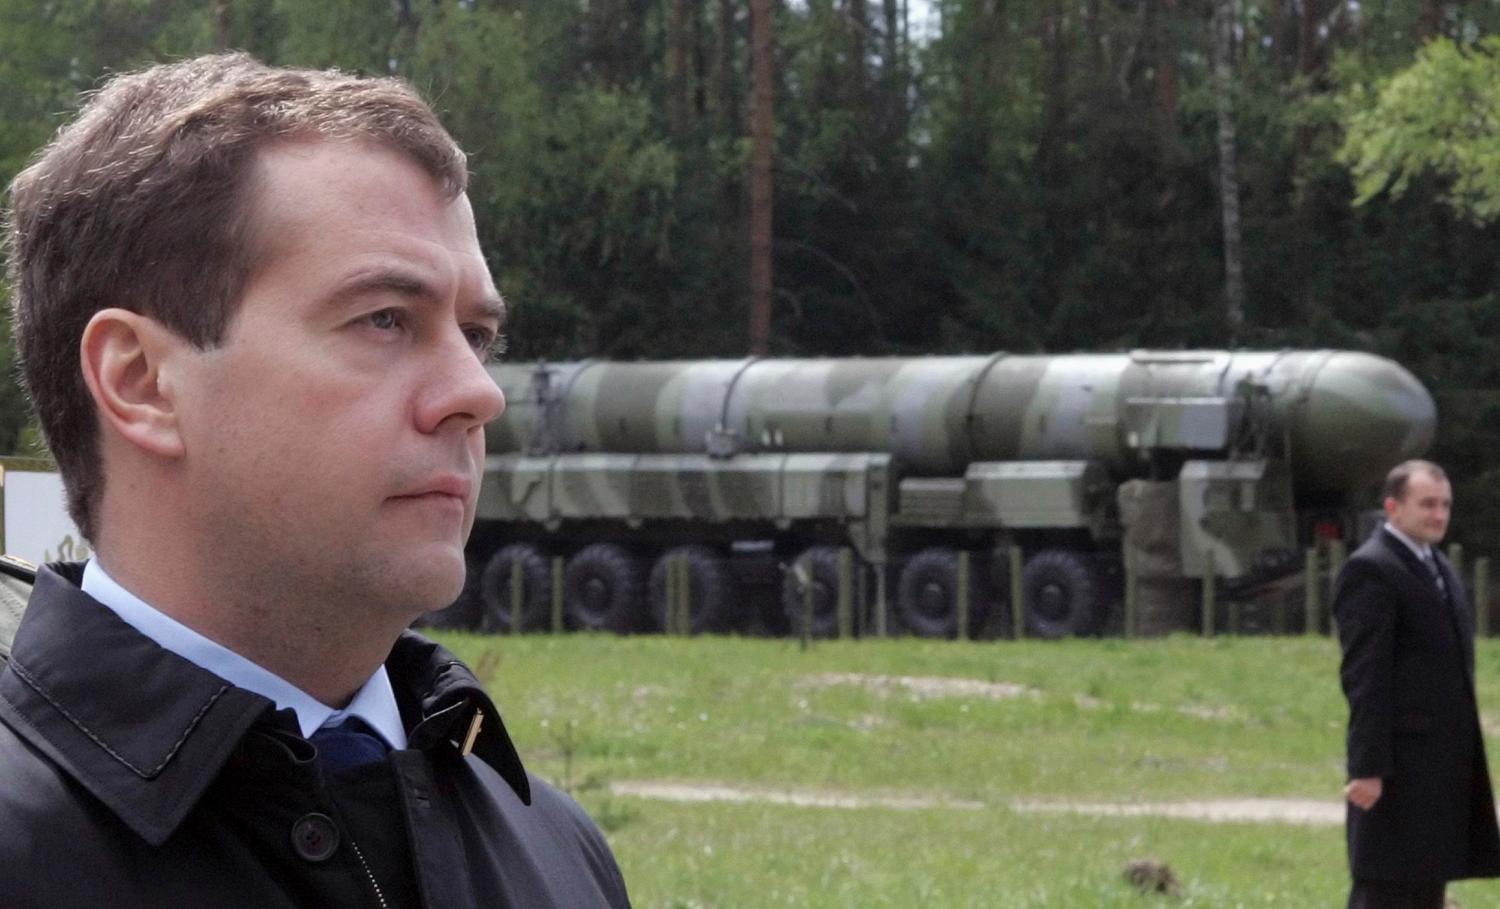 Russia's President Dmitry Medvedev (L) visits a missile base in Teikovo in the Ivanovo region, May 15, 2008. Medvedev made his first domestic trip as Kremlin leader to a top-secret missile base on Thursday, underscoring the strategic role of nuclear weapons in Russia's assertive world policy. REUTERS/Pool (RUSSIA) - RTX5QY3